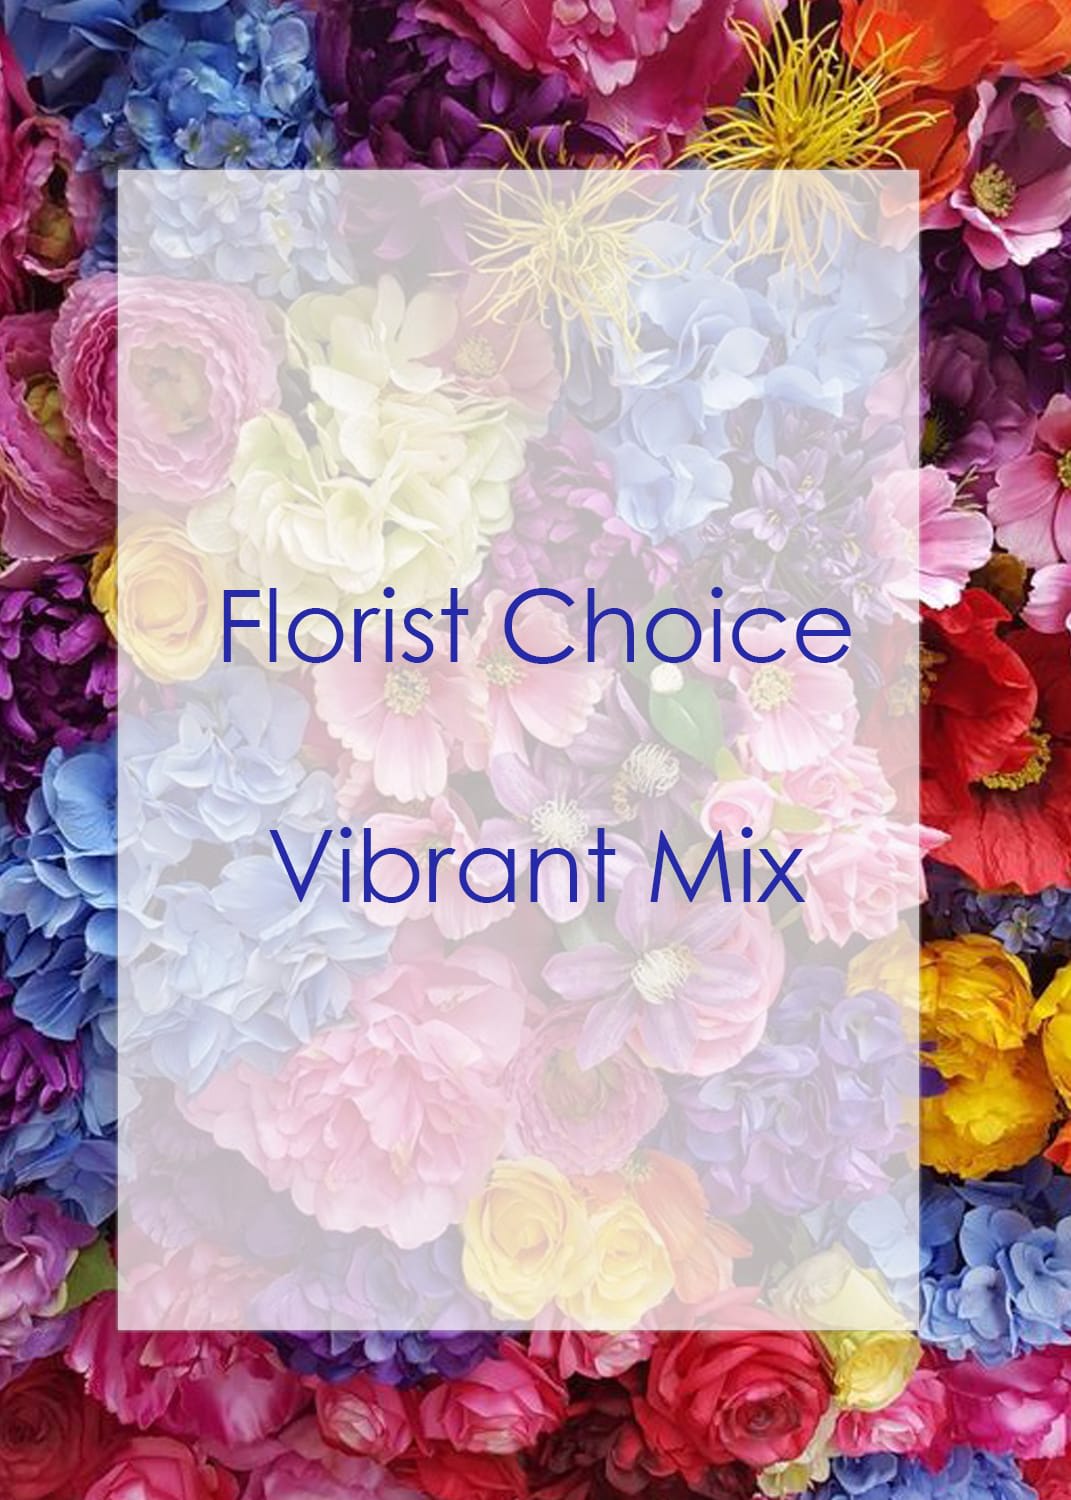 Florist Choice Vibrant Mix - We will pick the most beautiful seasonal flowers in vibrant hues to create a gorgeous design, bursting with celebratory colors and perfect for any occasion! This arrangement will be designed in a vase and created with primarily vibrant colors, such as hot pink, purple, green, yellow, orange, etc. 